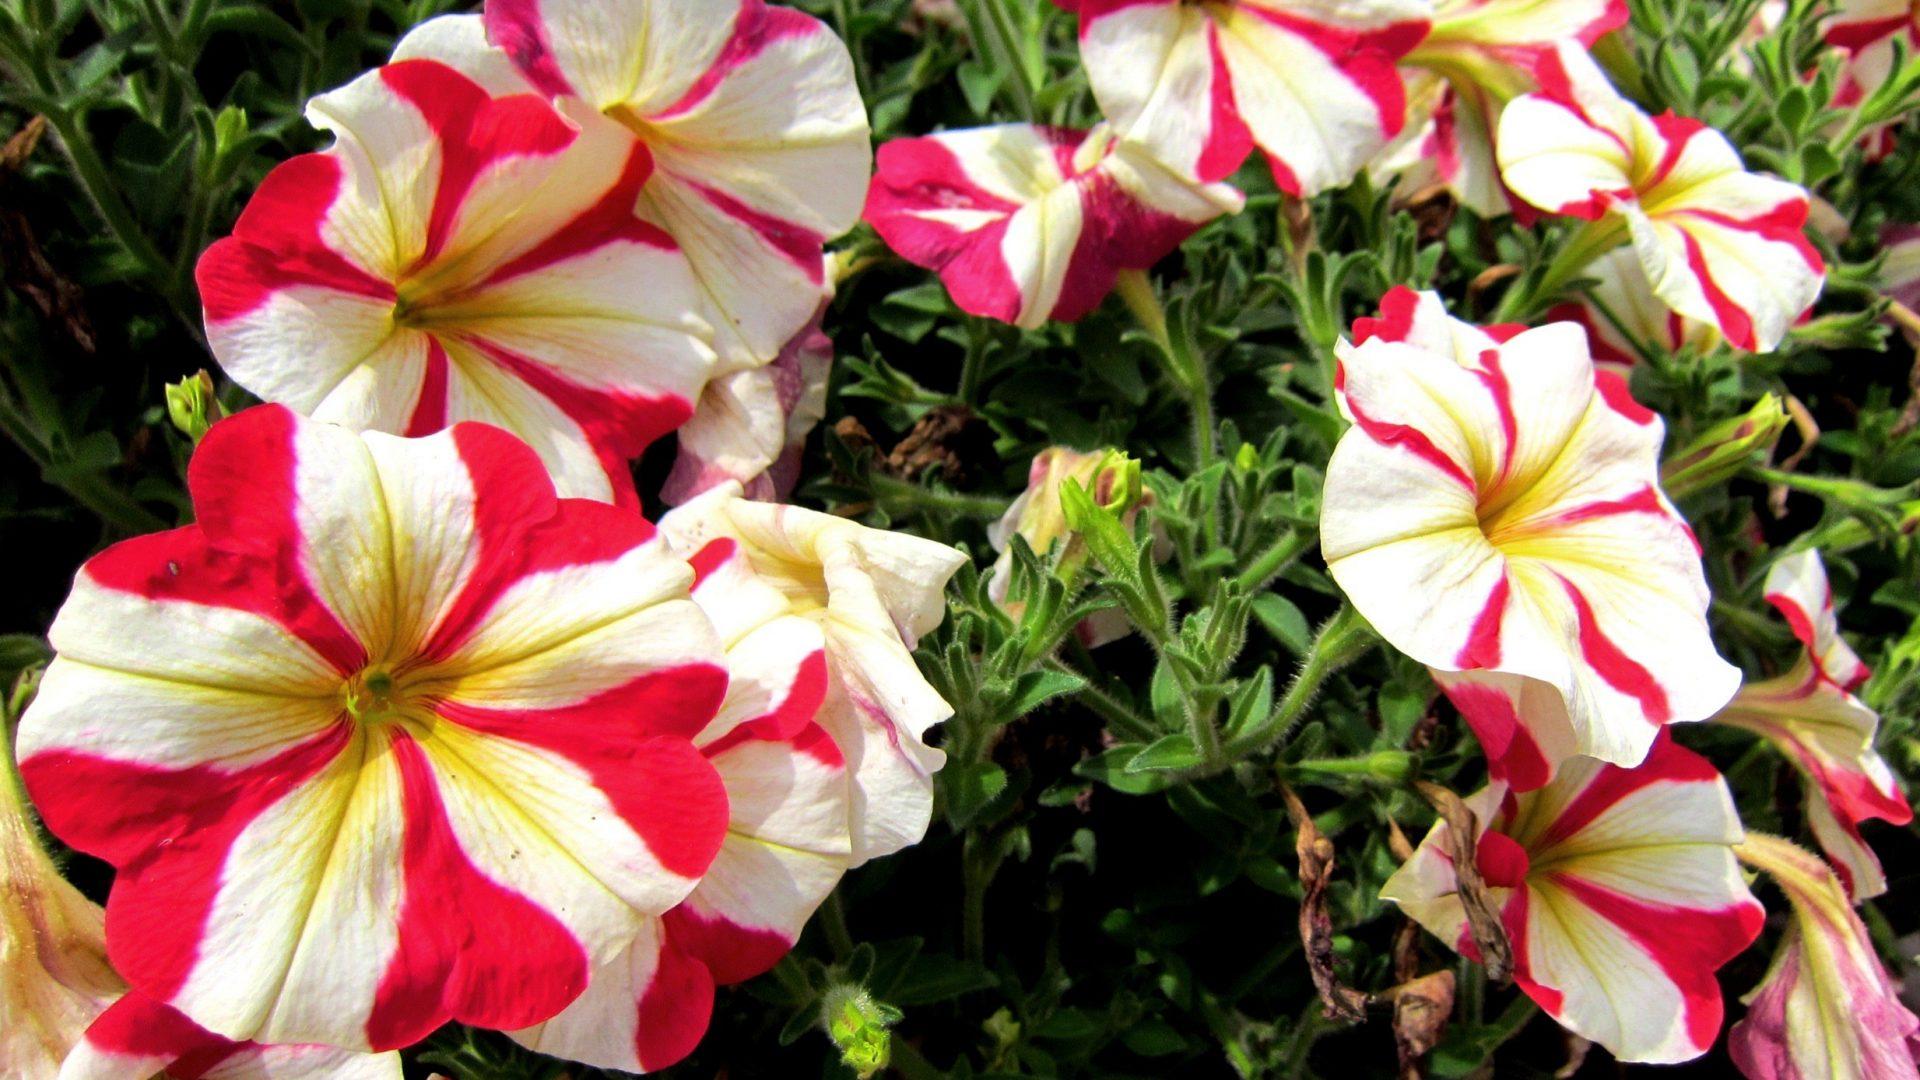 Petunia Tag wallpaper: Colorful Petunia Pretty Lovely Center Flower